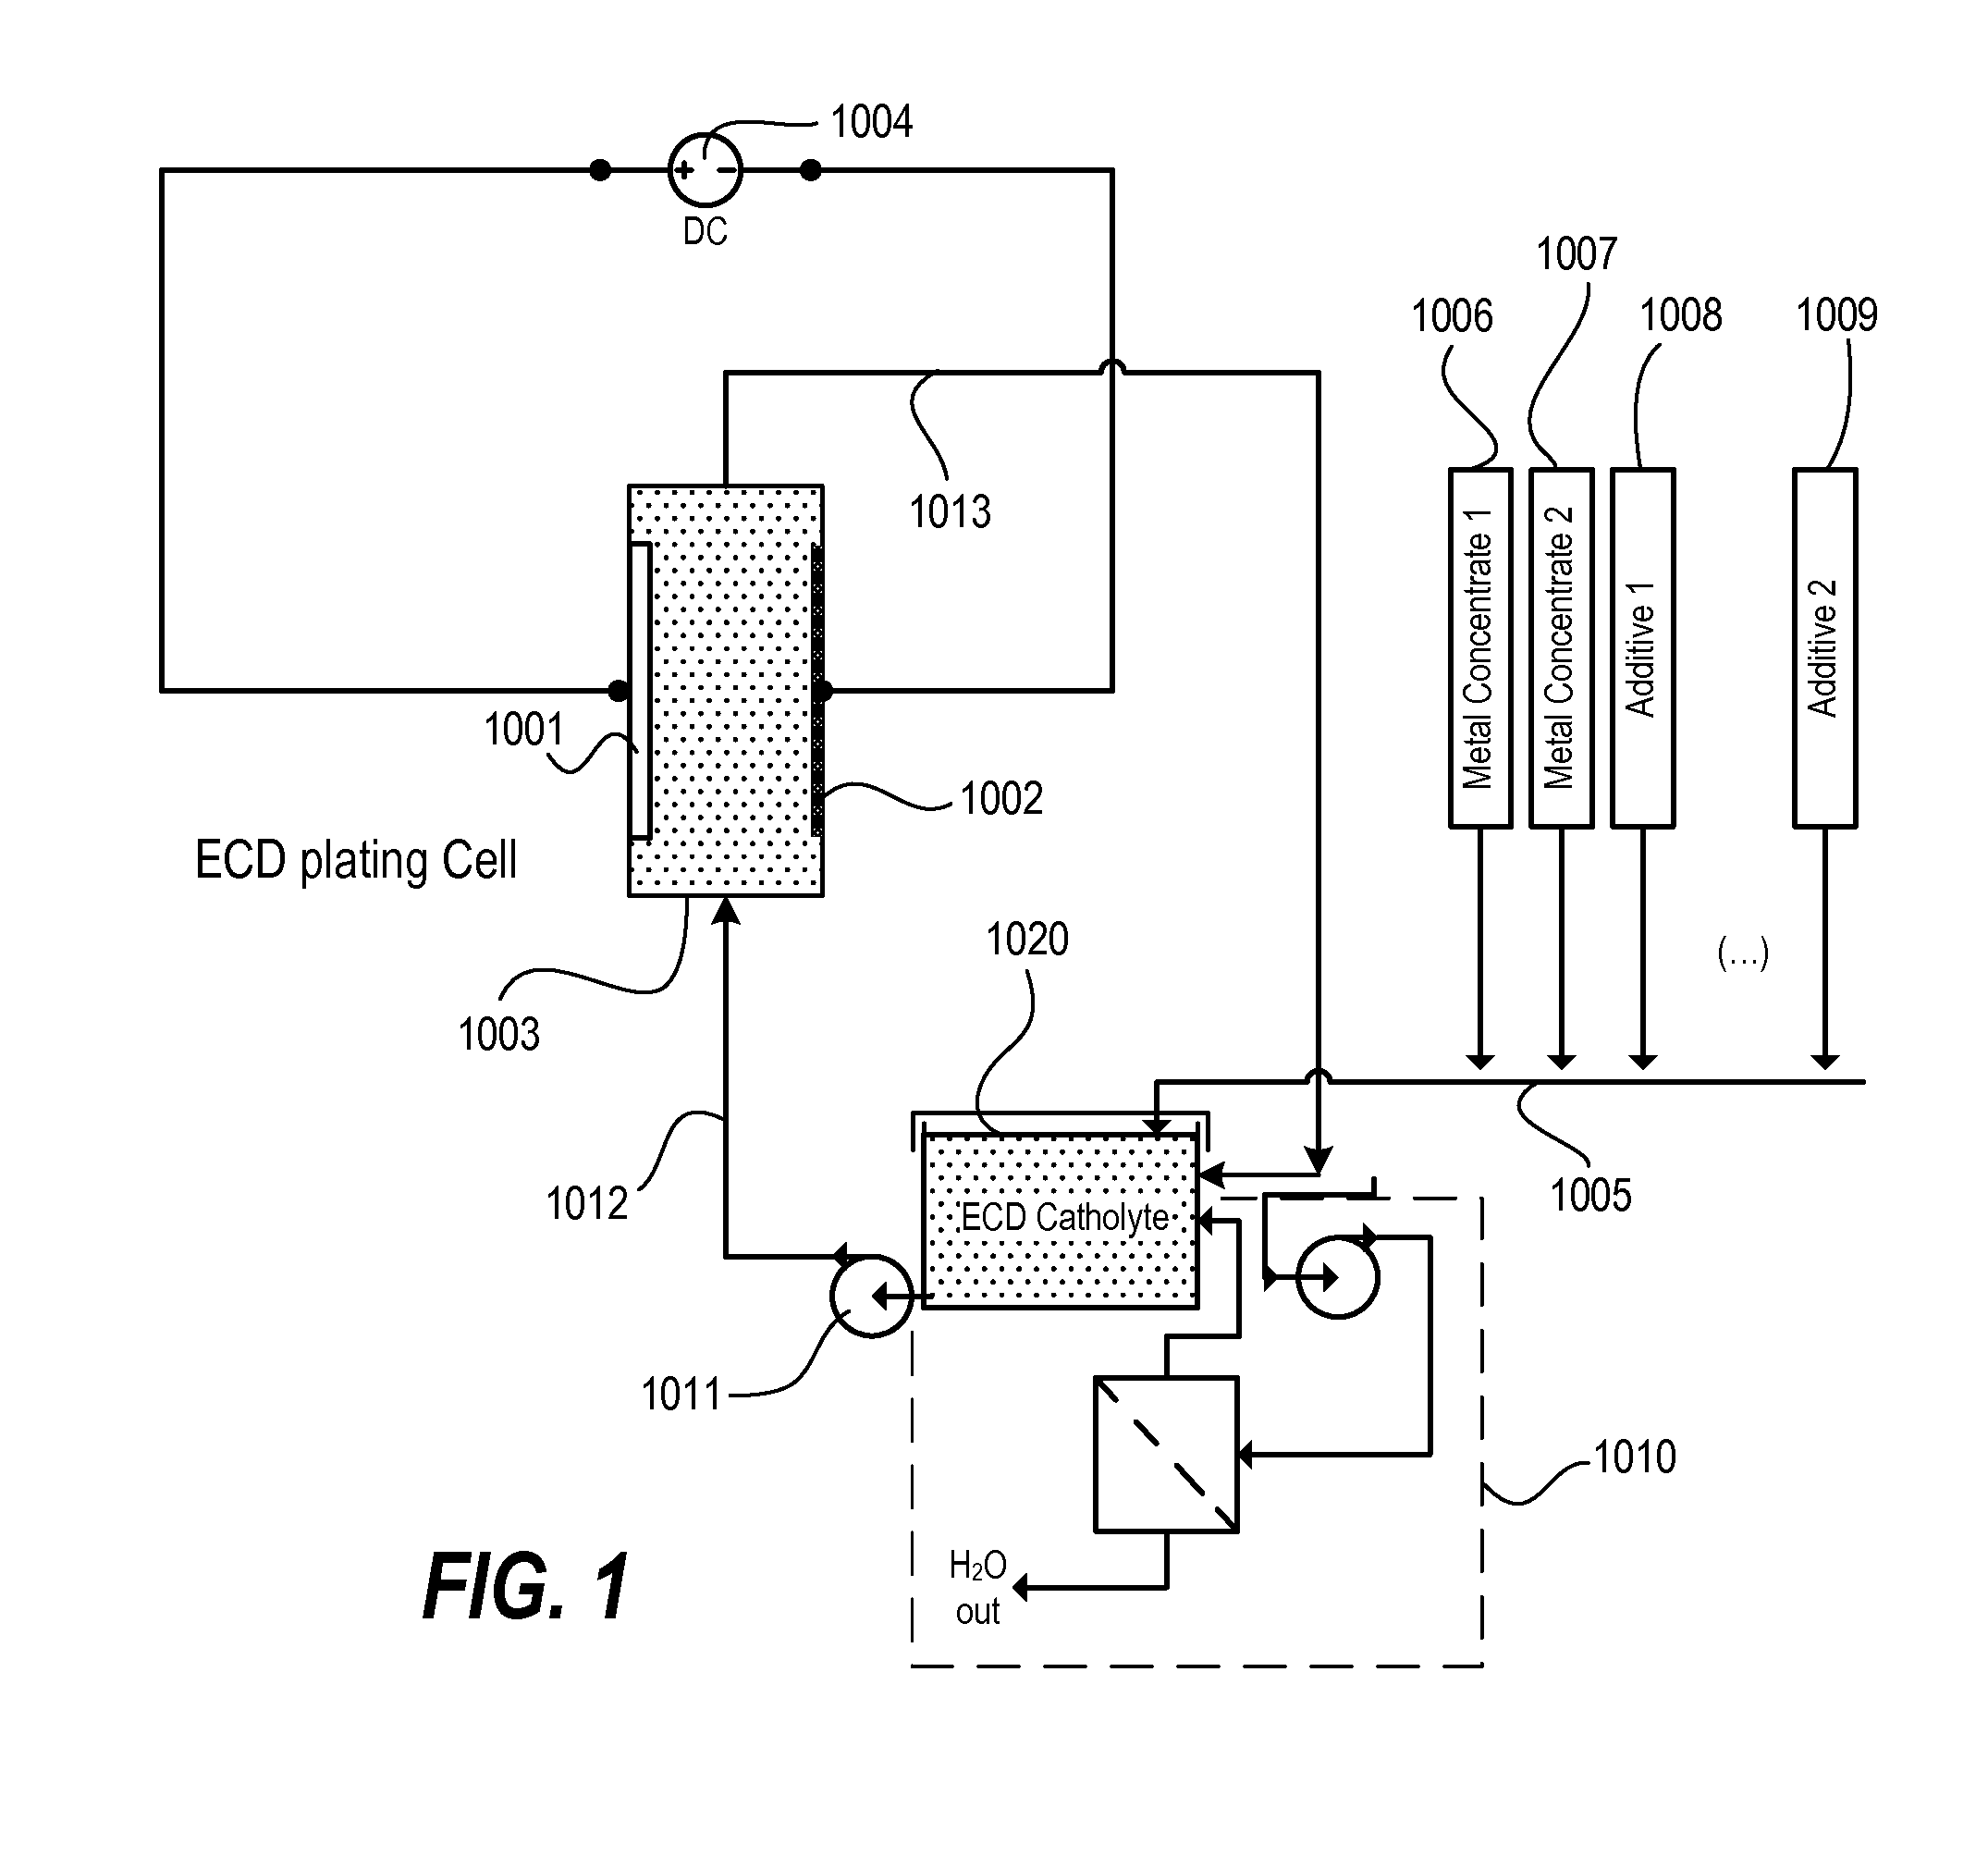 Electrochemical deposition apparatus and methods for controlling the chemistry therein